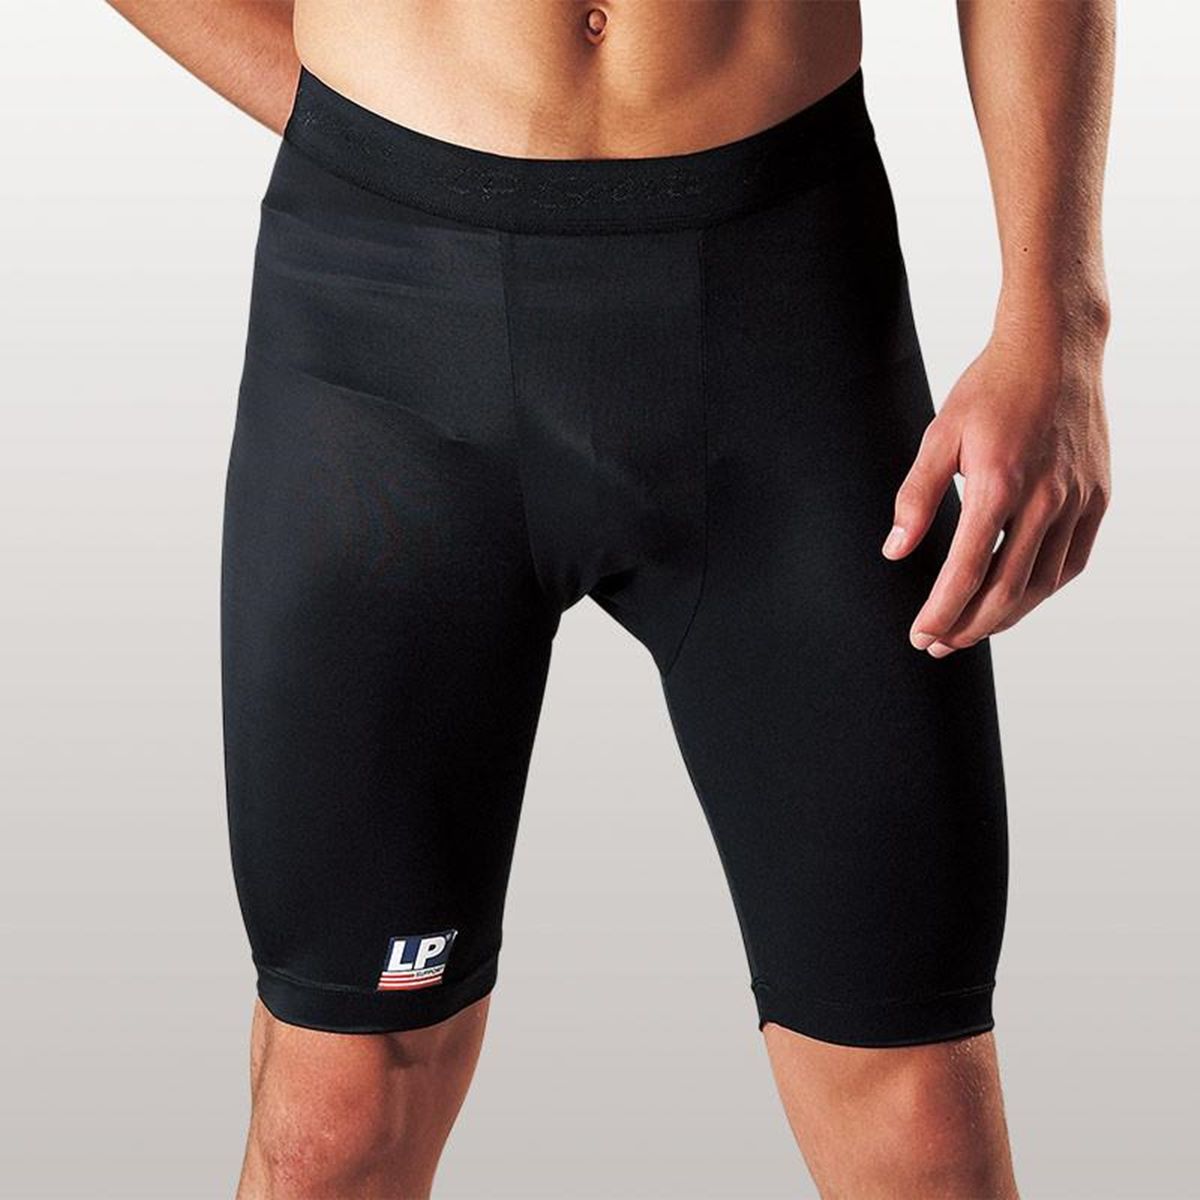 15 Unbelievable Thigh Compression Shorts For 2023